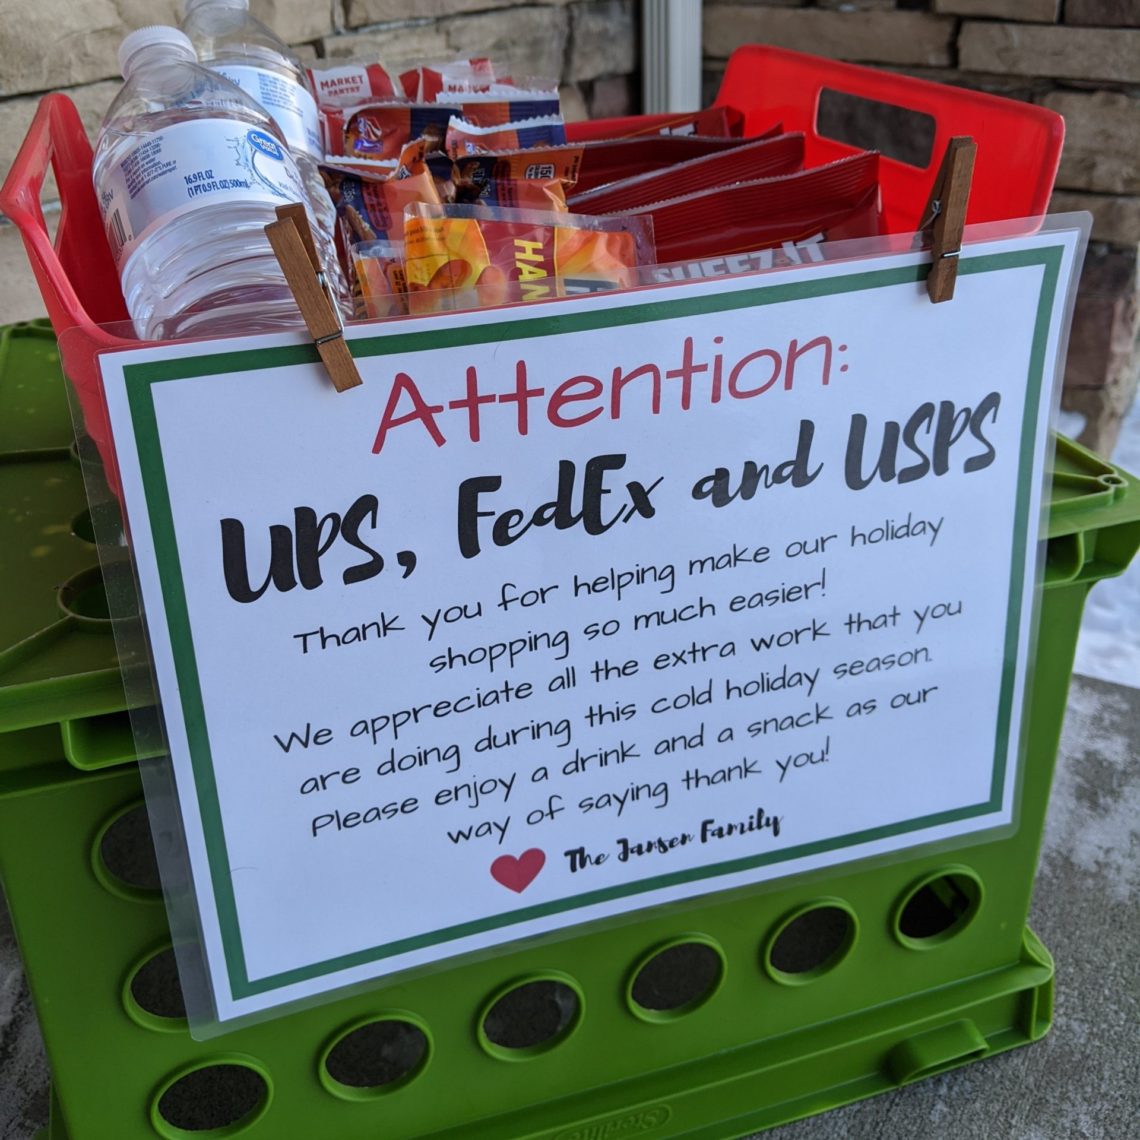 Treats left out for delivery (UPS, FedEx and USPS) drivers for a random act of kindness during the holidays. Includes a free printable and ideas for what treats to include! #randomactofkindness #raks #kindnessforkids #holidaykindness #christmas